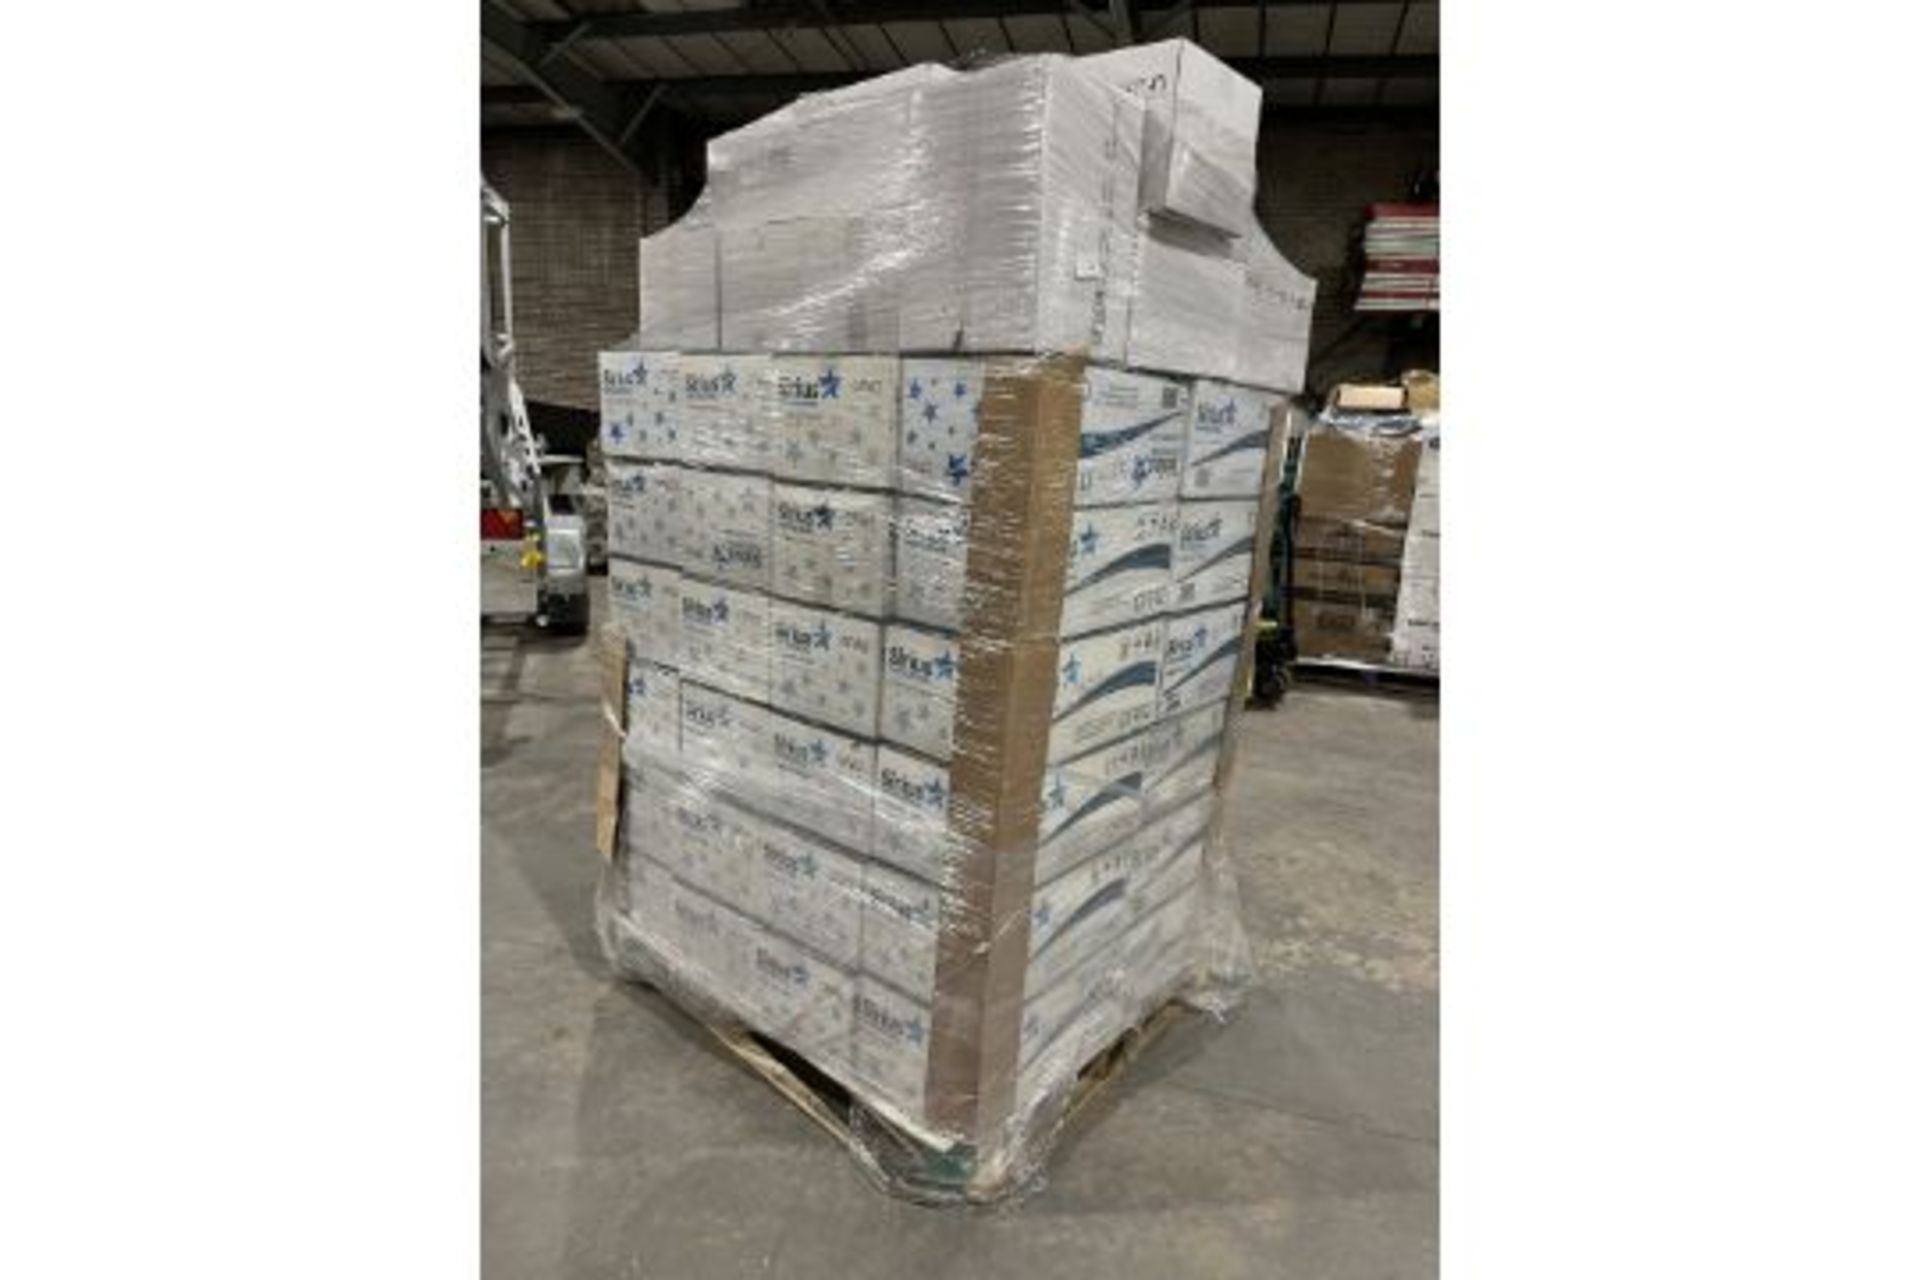 51 x Boxes Of Sirius 2 Ply Paper Towels